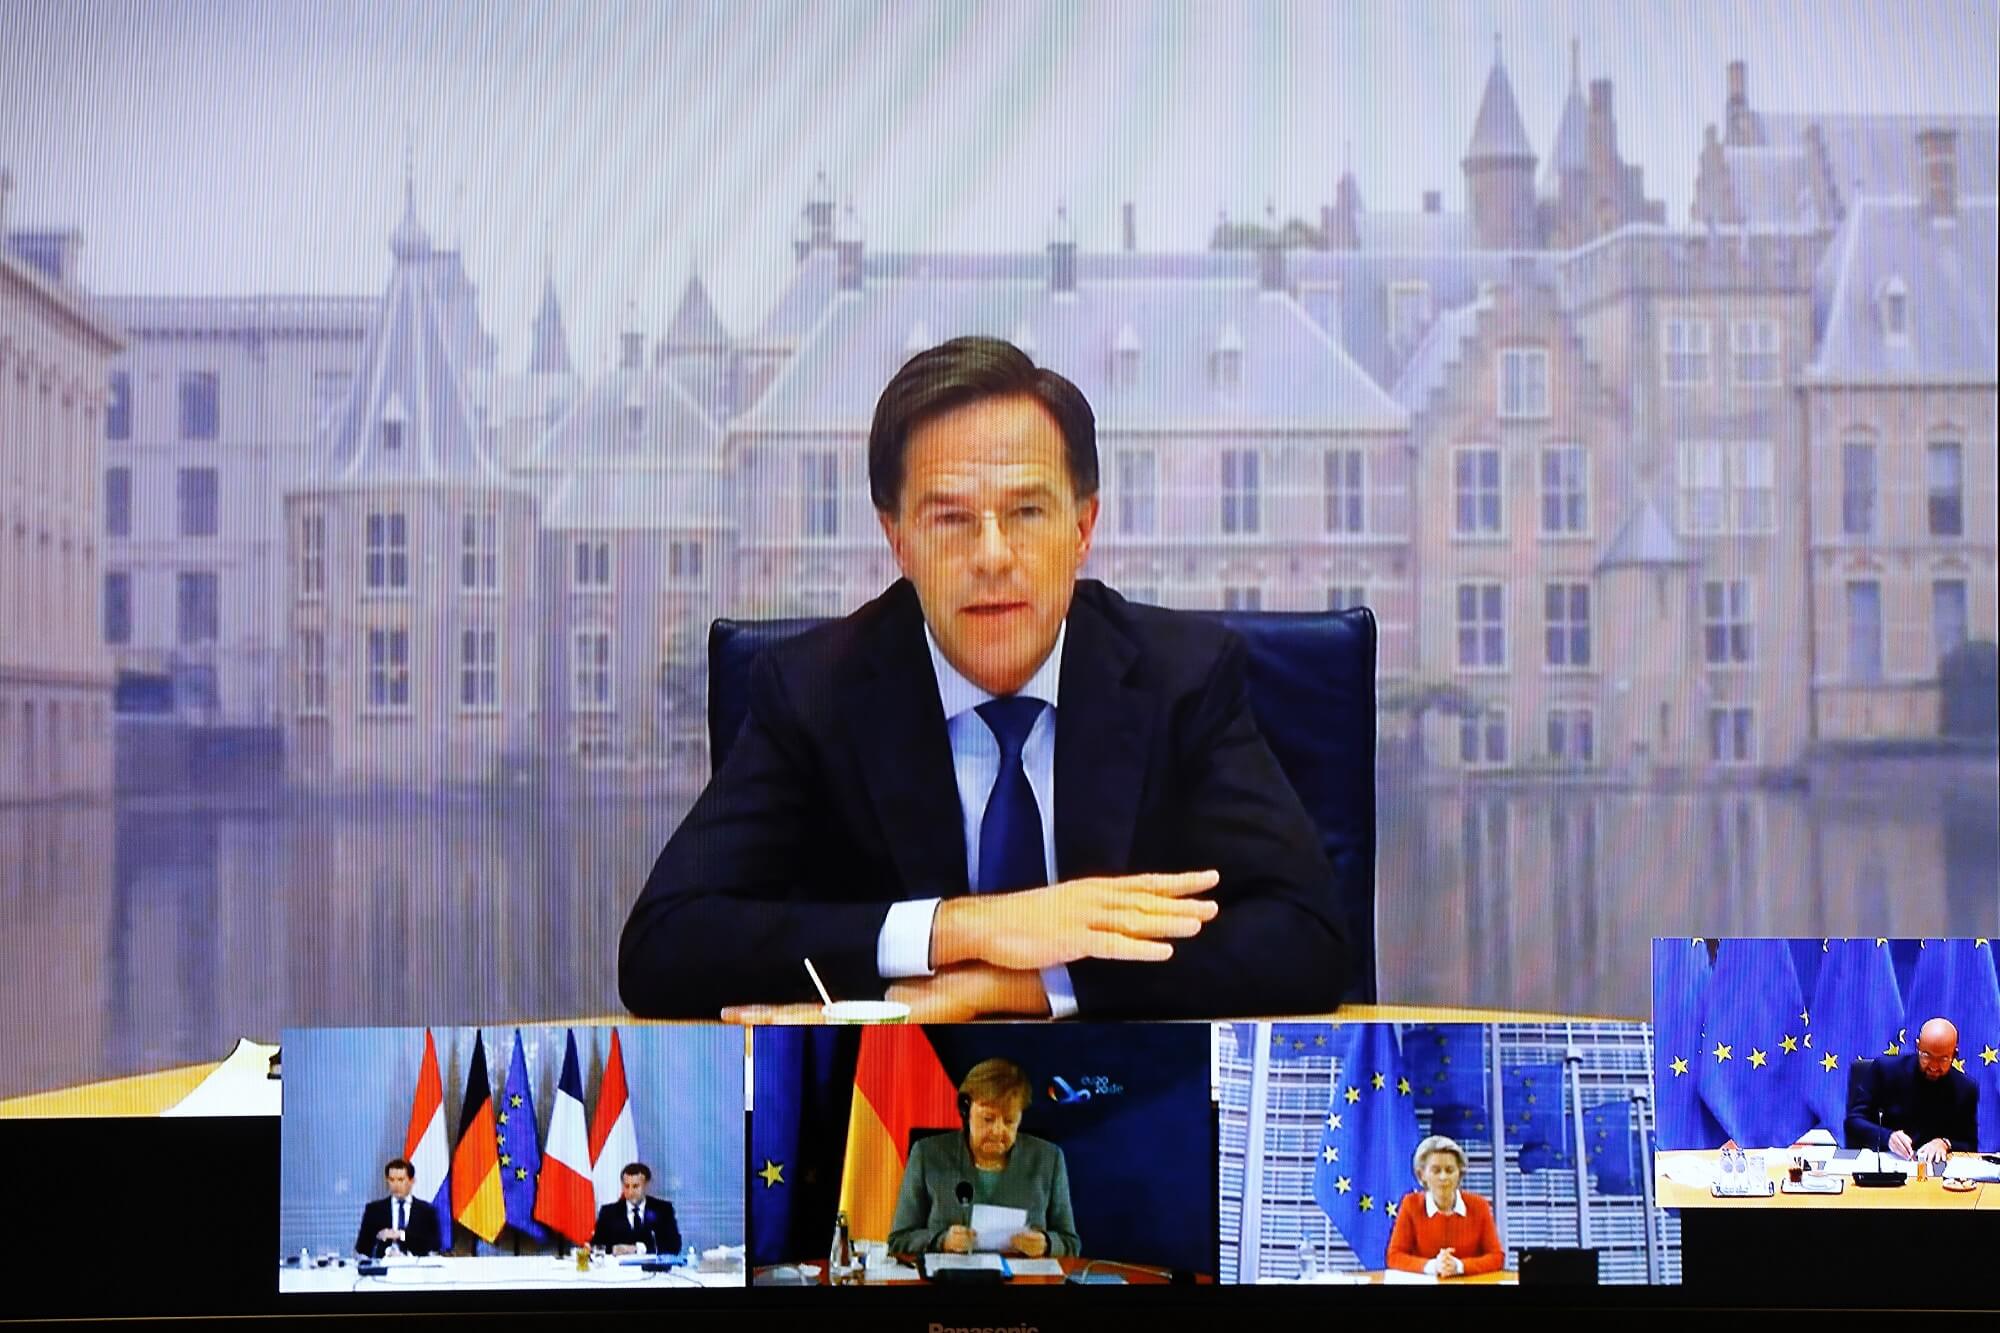 Schout- Dutch prime minister Mark Rutte during a video conference with the European Council in 2020. European Union